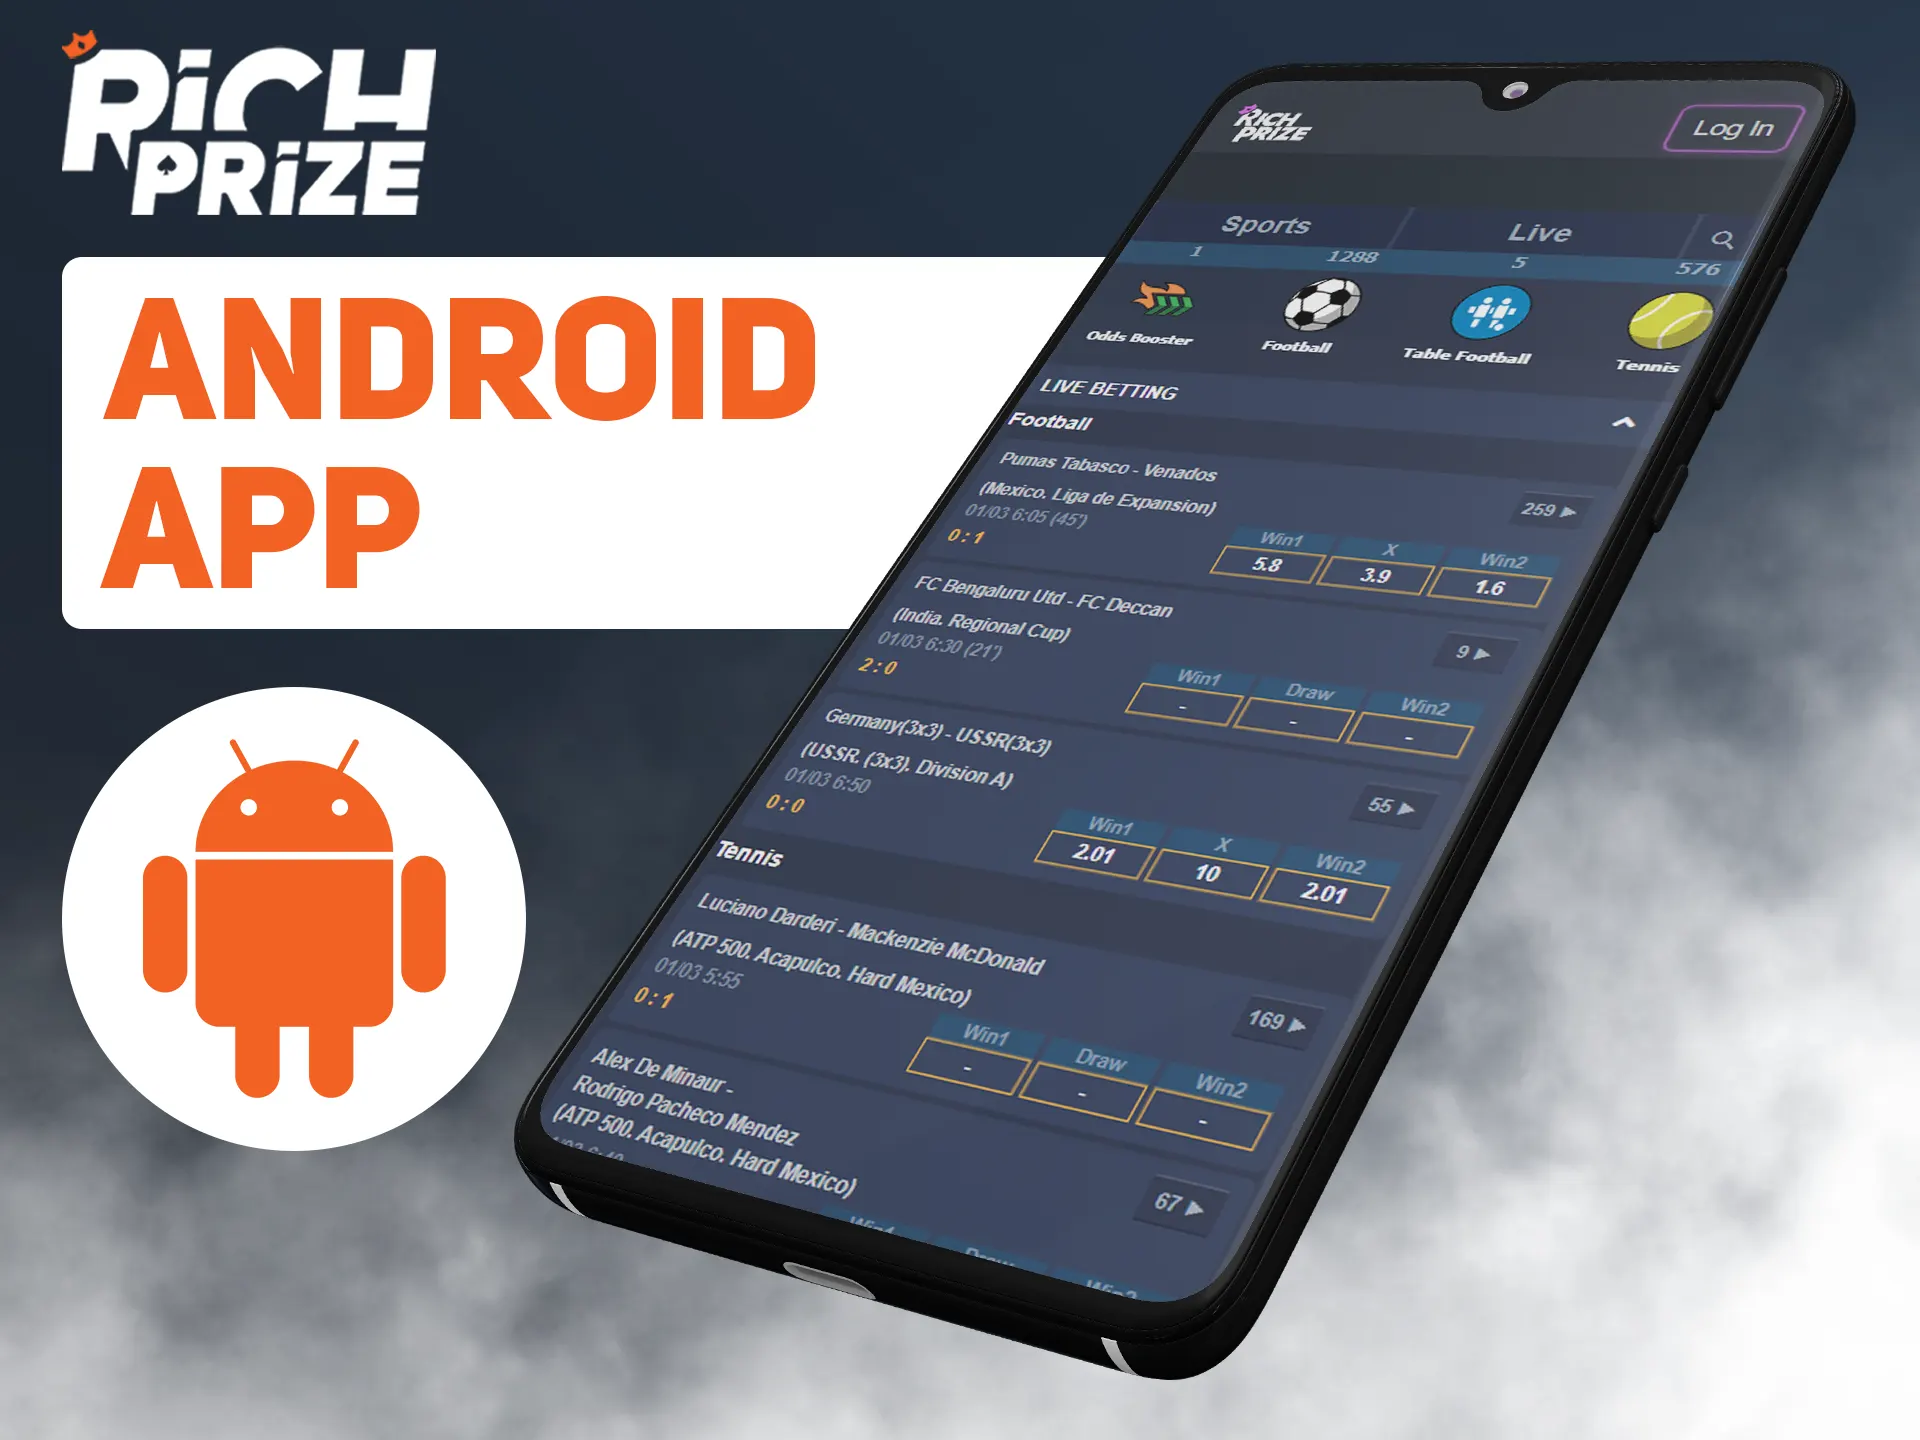 Bet with comfort using Richprize Android app.